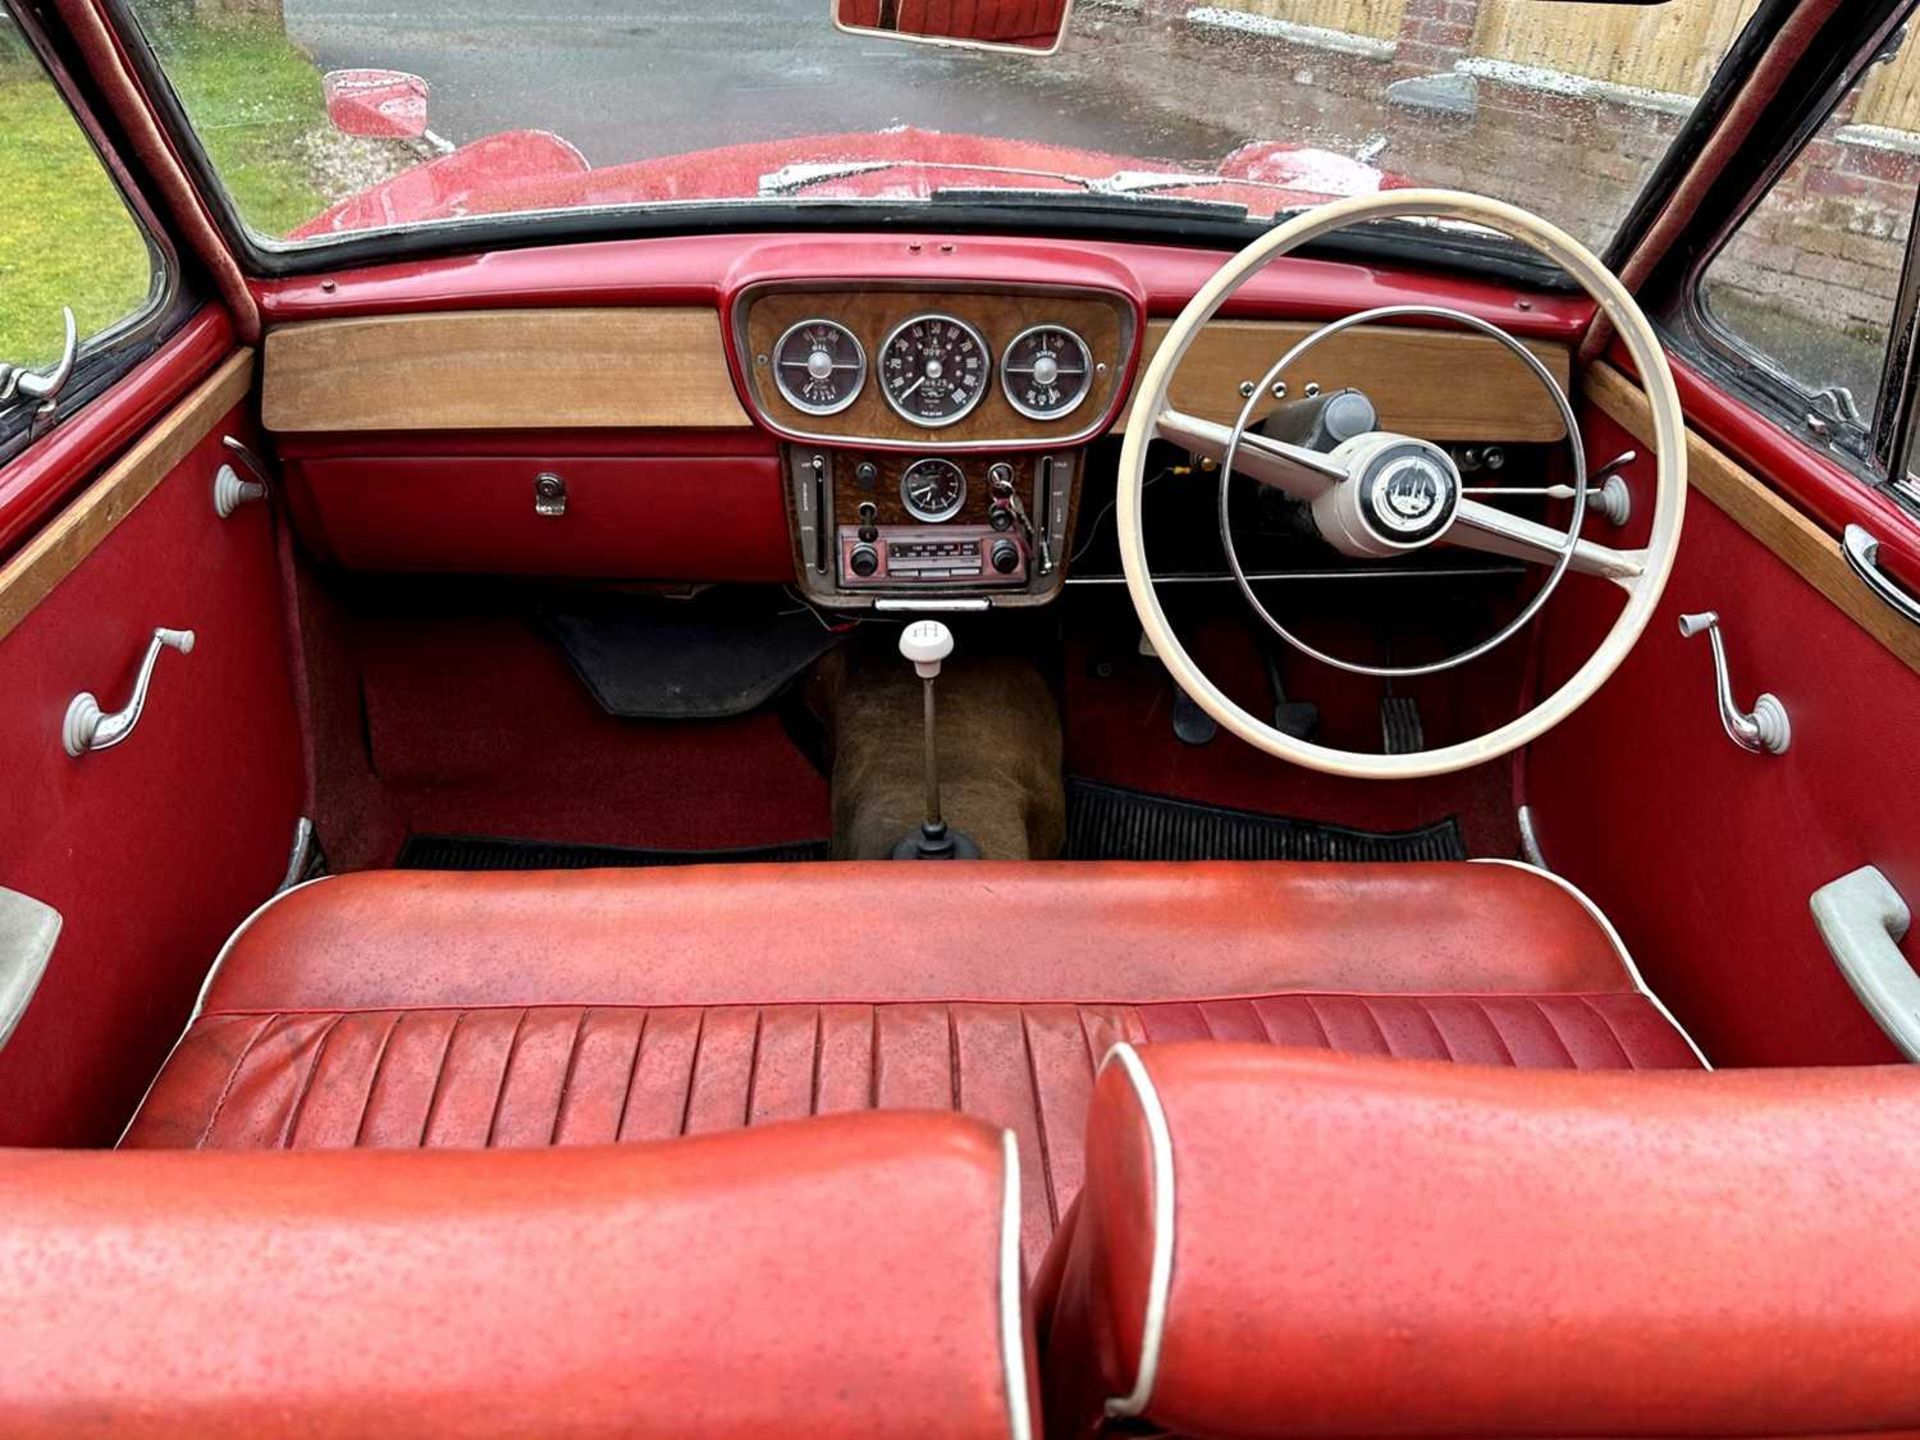 1961 Singer Gazelle Convertible Comes complete with overdrive, period radio and badge bar - Bild 51 aus 95